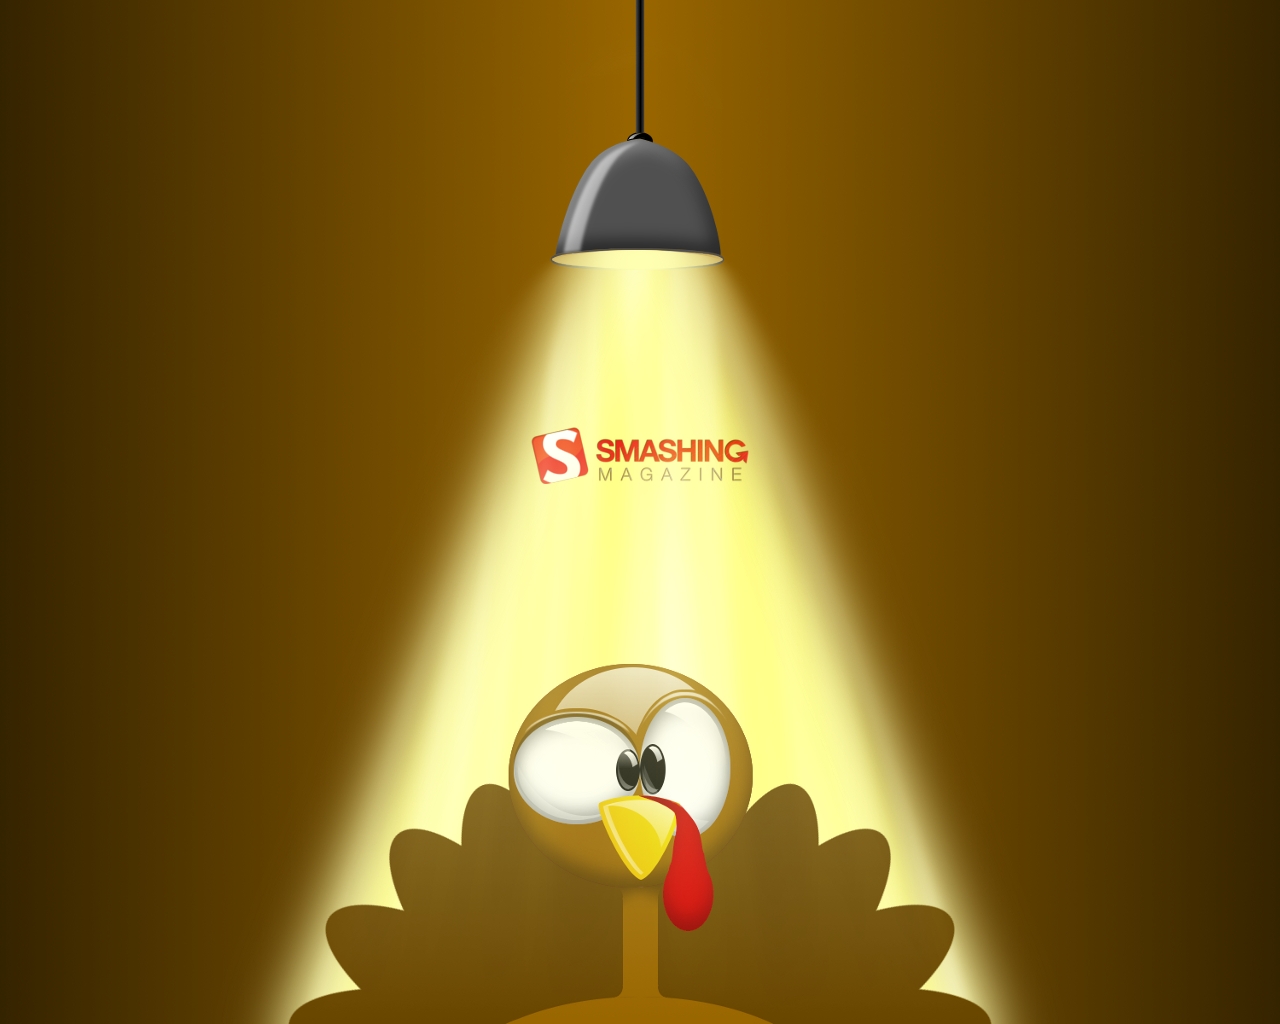 funny thanksgiving quotes wallpapers